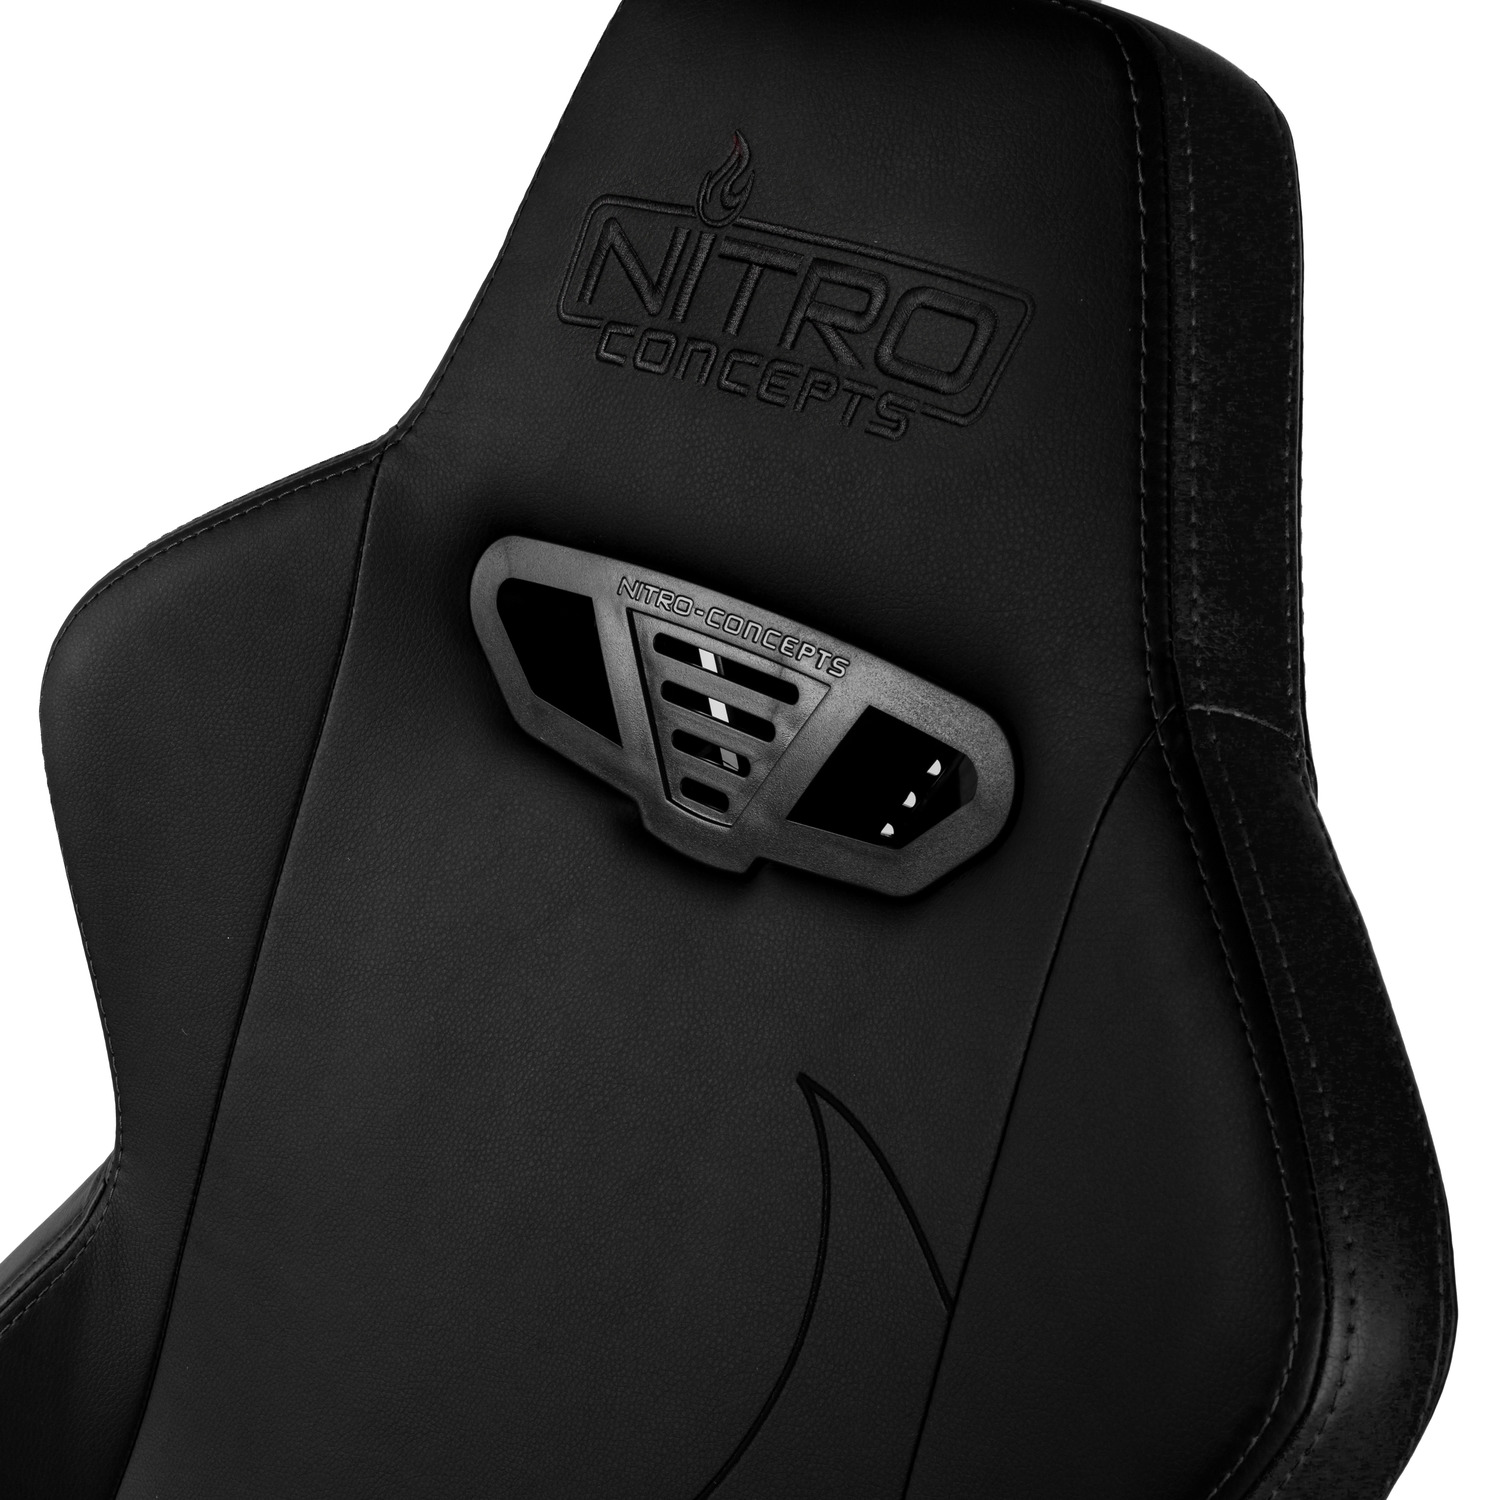 Nitro Concepts - S300 EX Gaming Chair Stealth Black